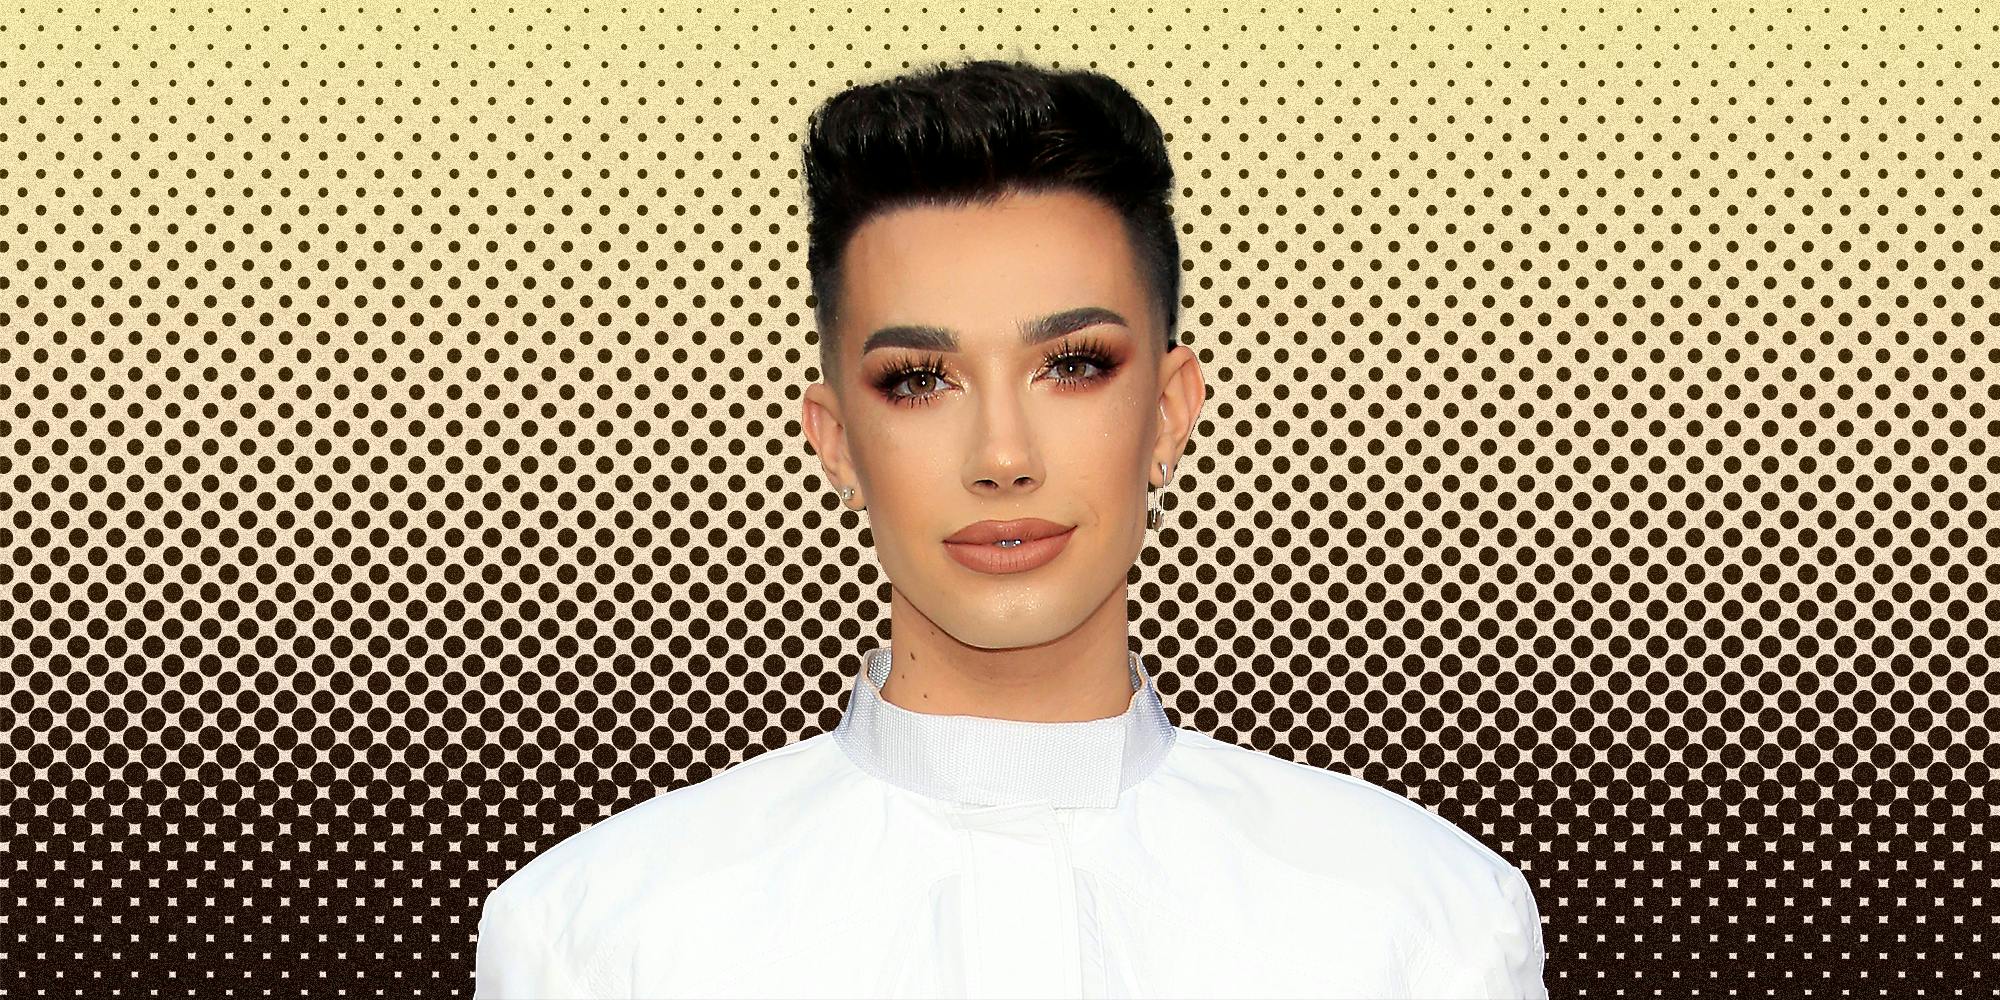 James Charles is being sued by former producer, claims he's being blac...